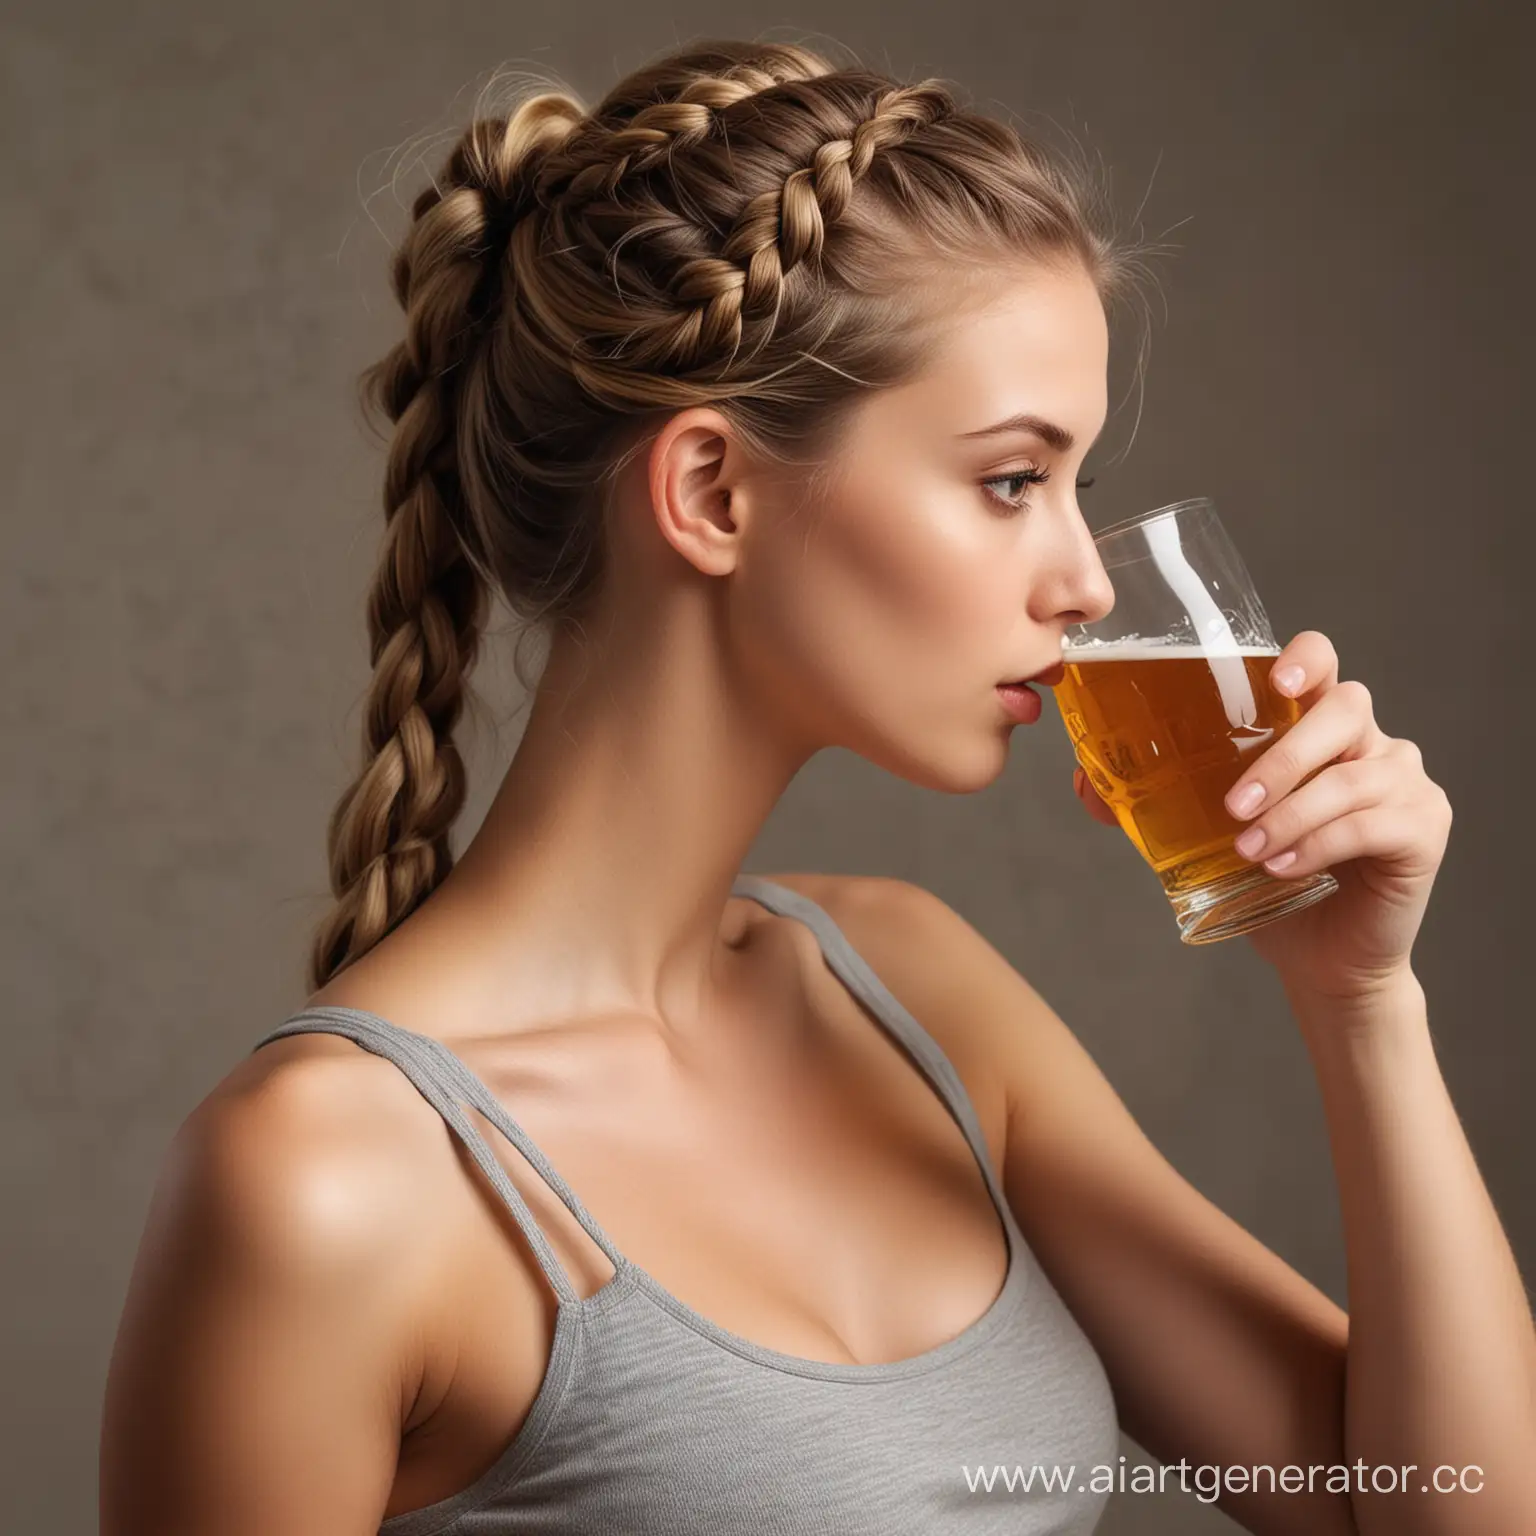 Attentive-Blond-Girl-Speaking-to-Grandpa-with-Beer-Glass-in-Hand